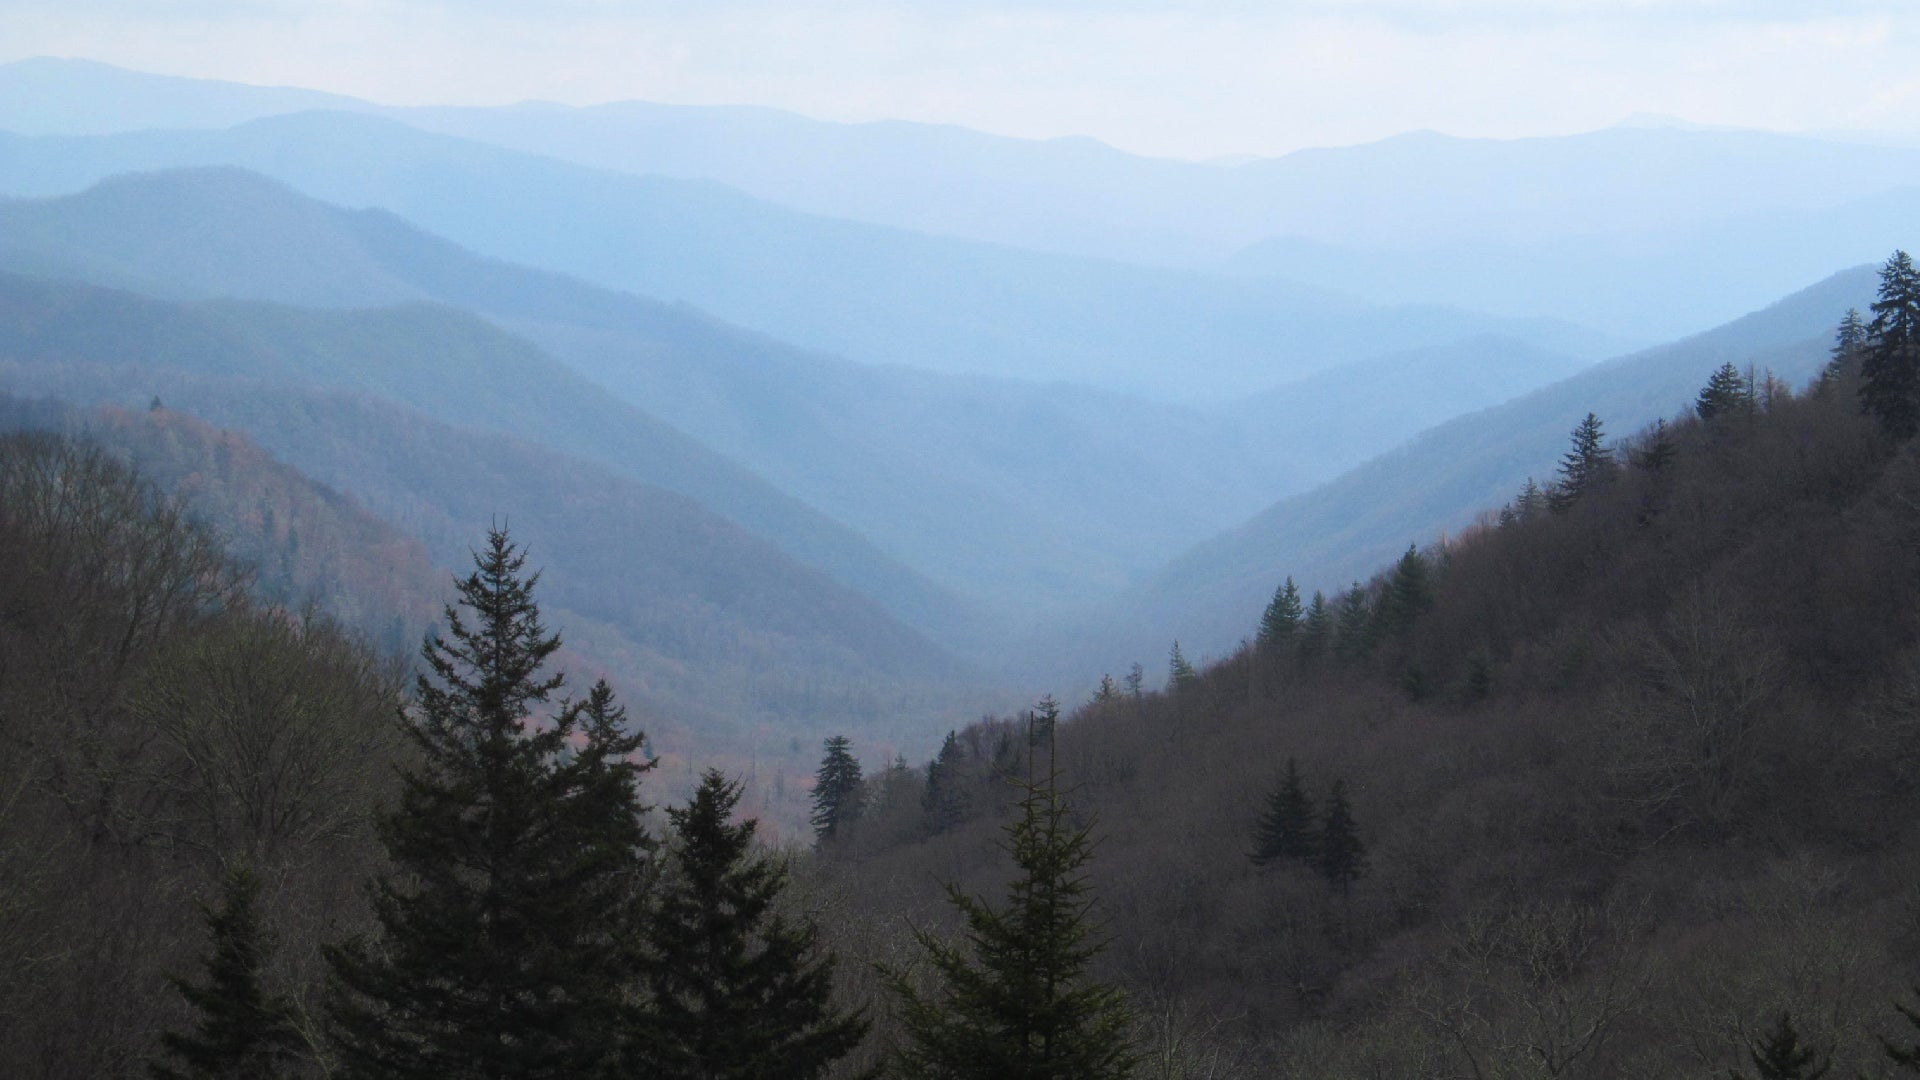 These tough hikes will get you to some of the best views in the Smoky Mountains.Doug Kerr